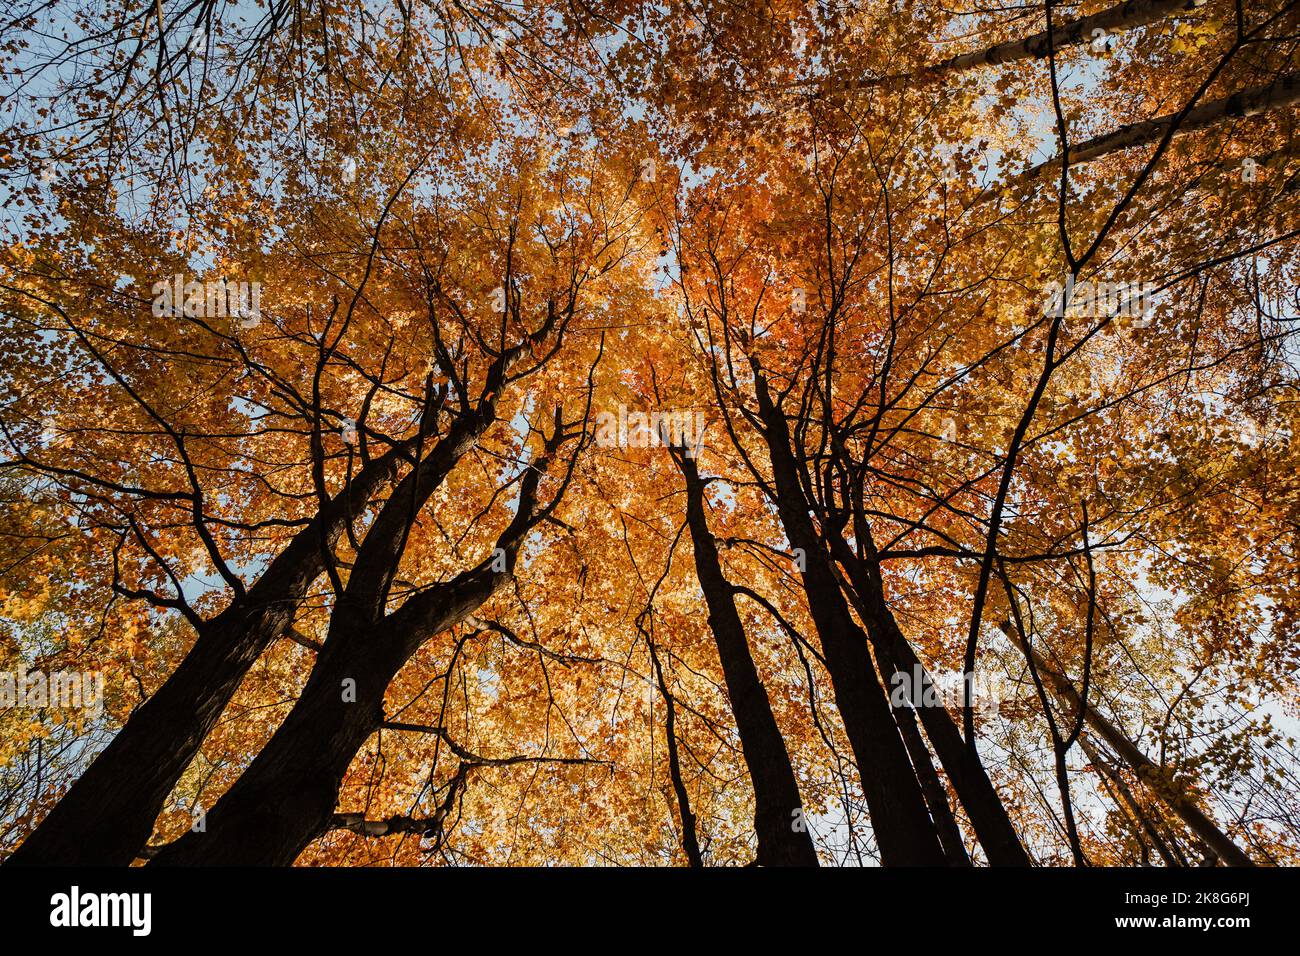 looking up golden orange leaves tall trees Stock Photo